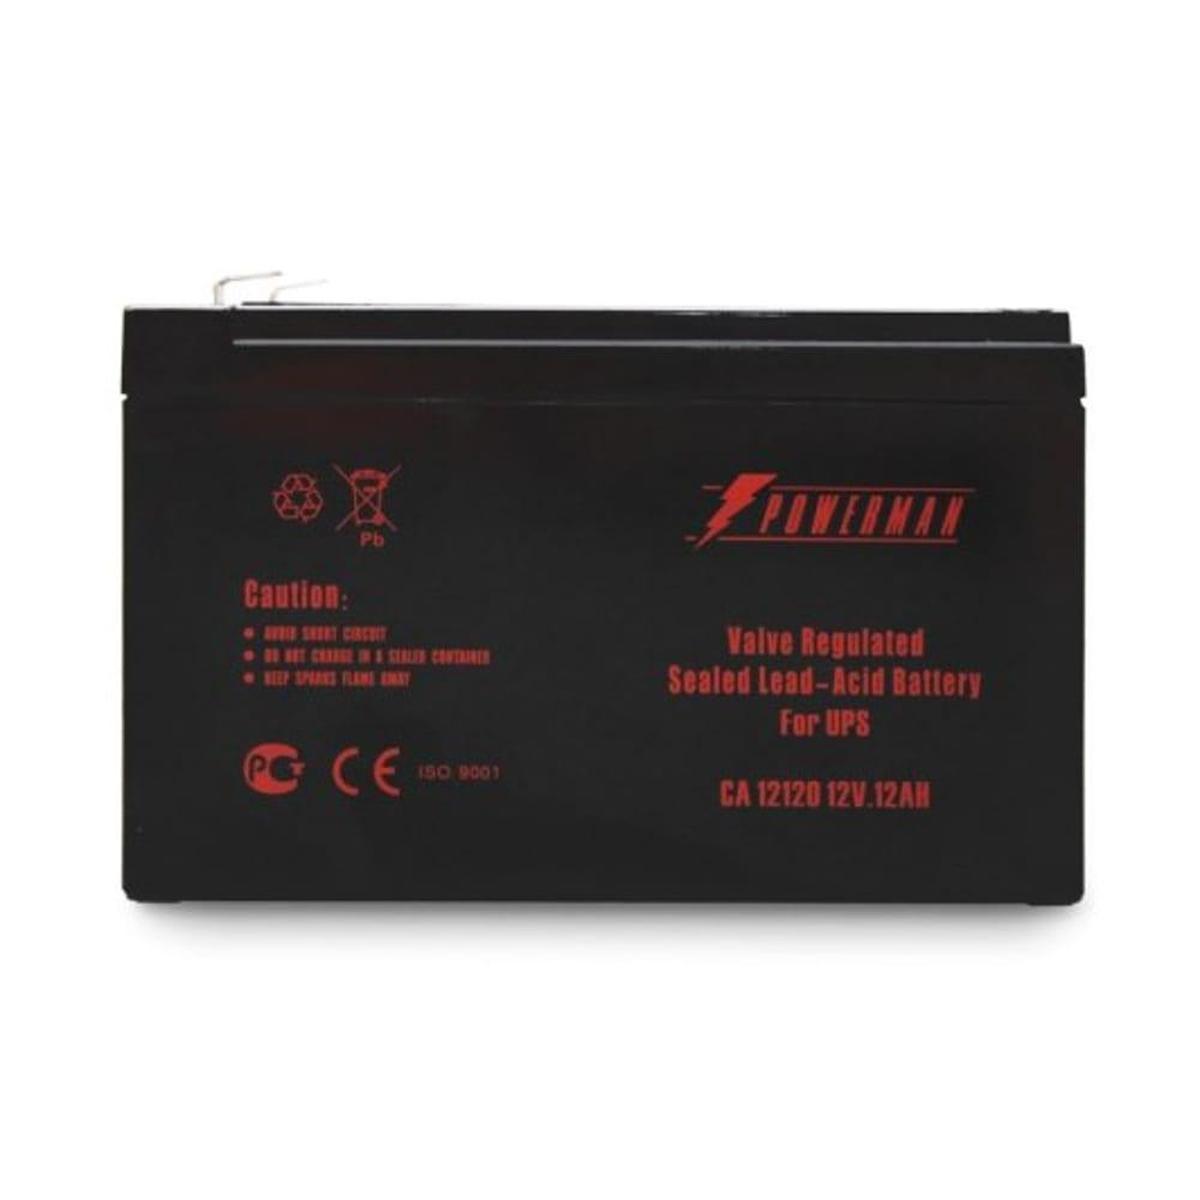 Battery POWERMAN Battery CA12120, voltage 12V, capacity 12Ah, max. discharge current 180A, max. charge current 3.6A, lead-acid type AGM, typ